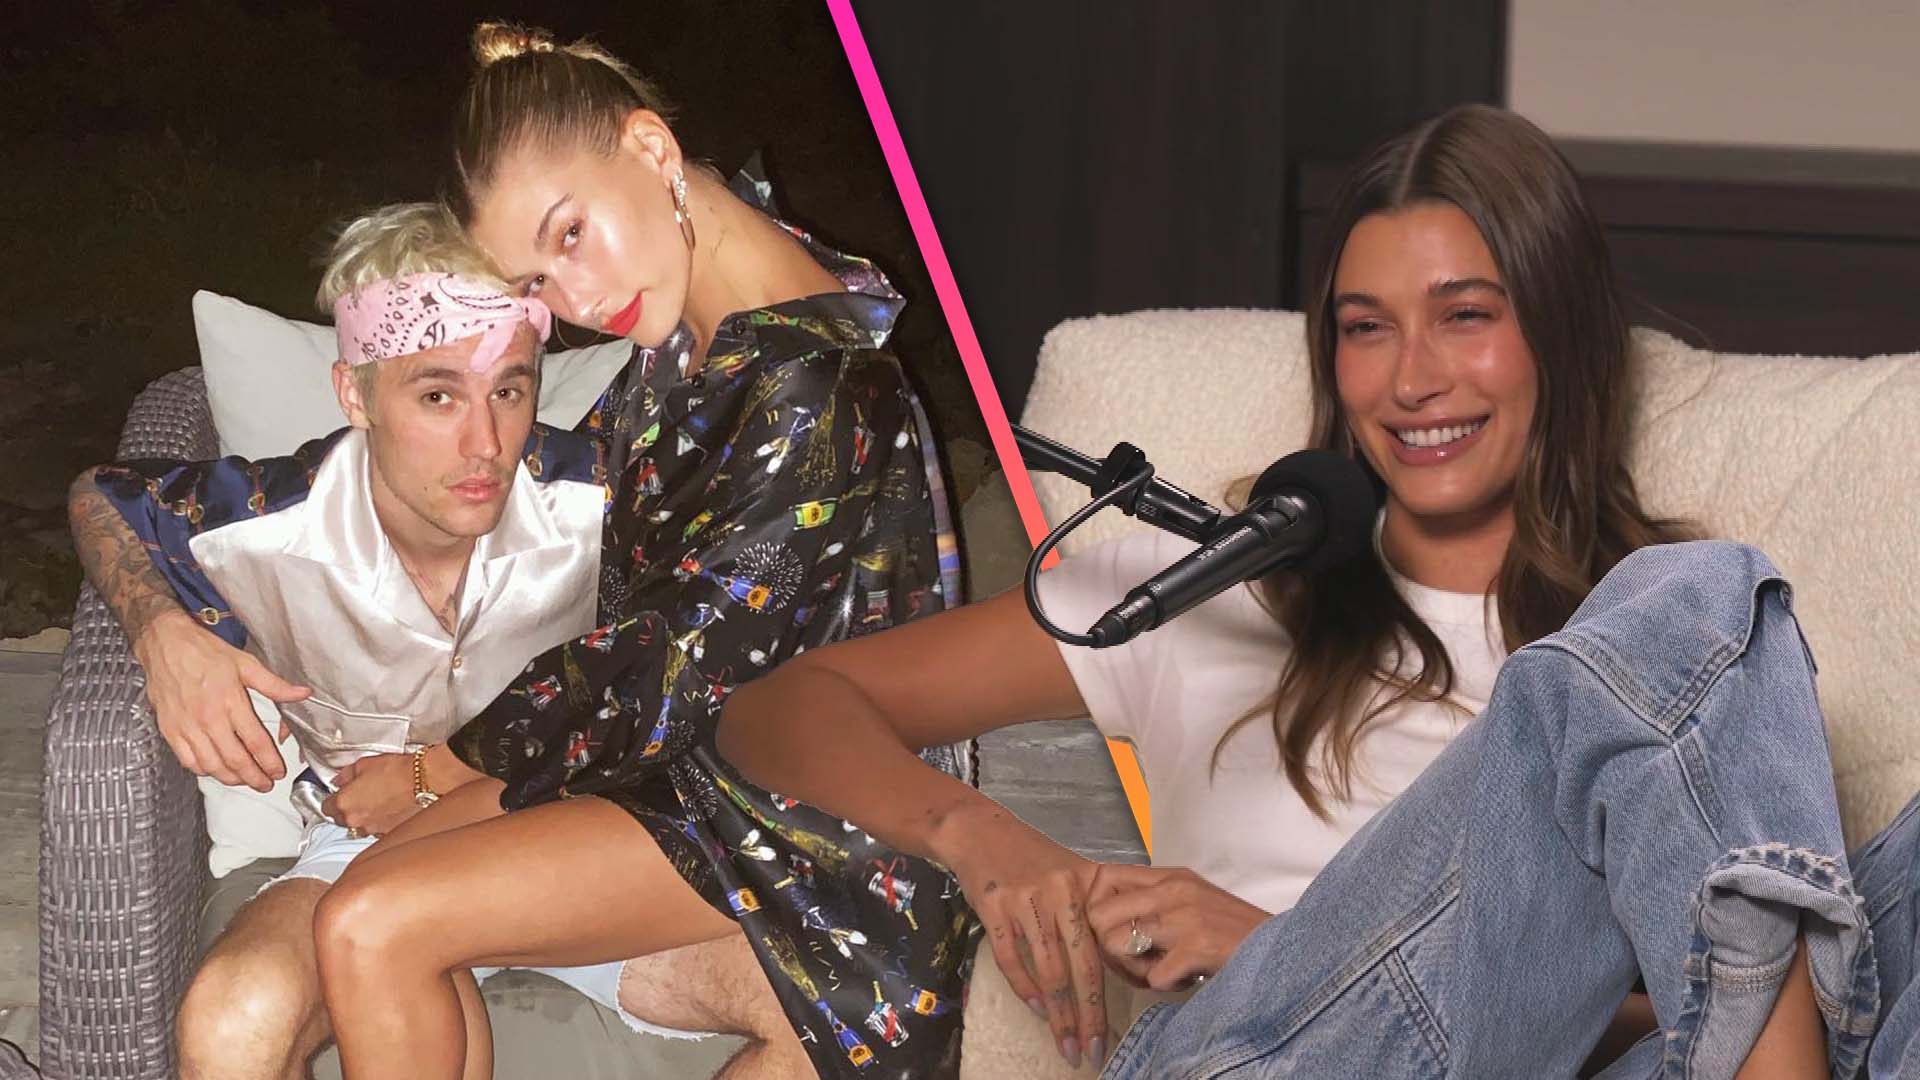 Hailey Sex - Hailey Bieber Details Her Sex Life With Justin Bieber: From Positions to  Turn Ons | Entertainment Tonight